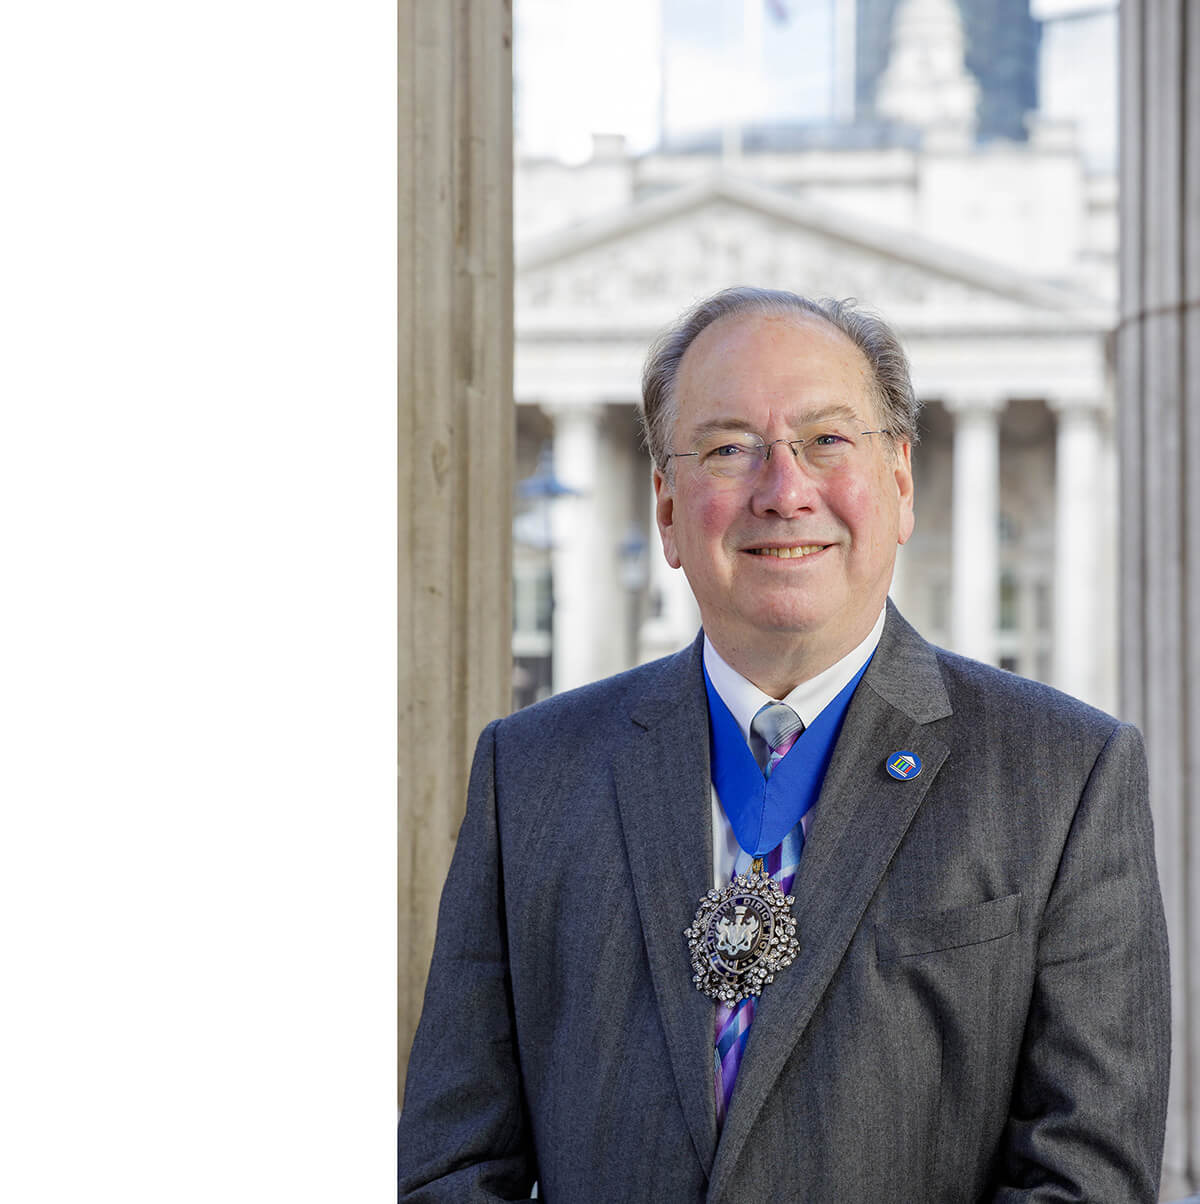 The Lord Mayor of the City of London